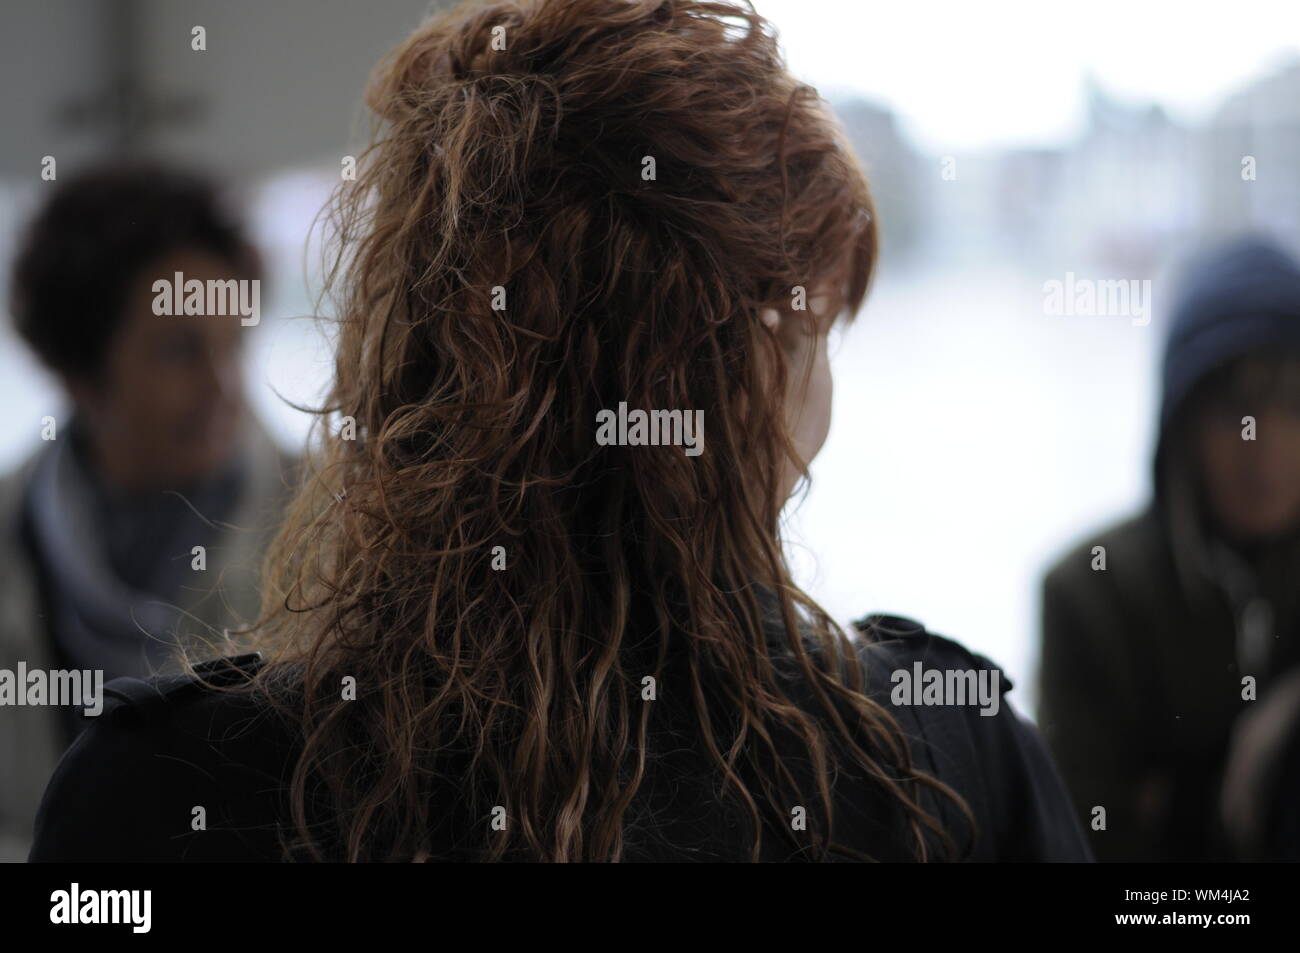 Rear View Of Woman With Wavy Hair Stock Photo